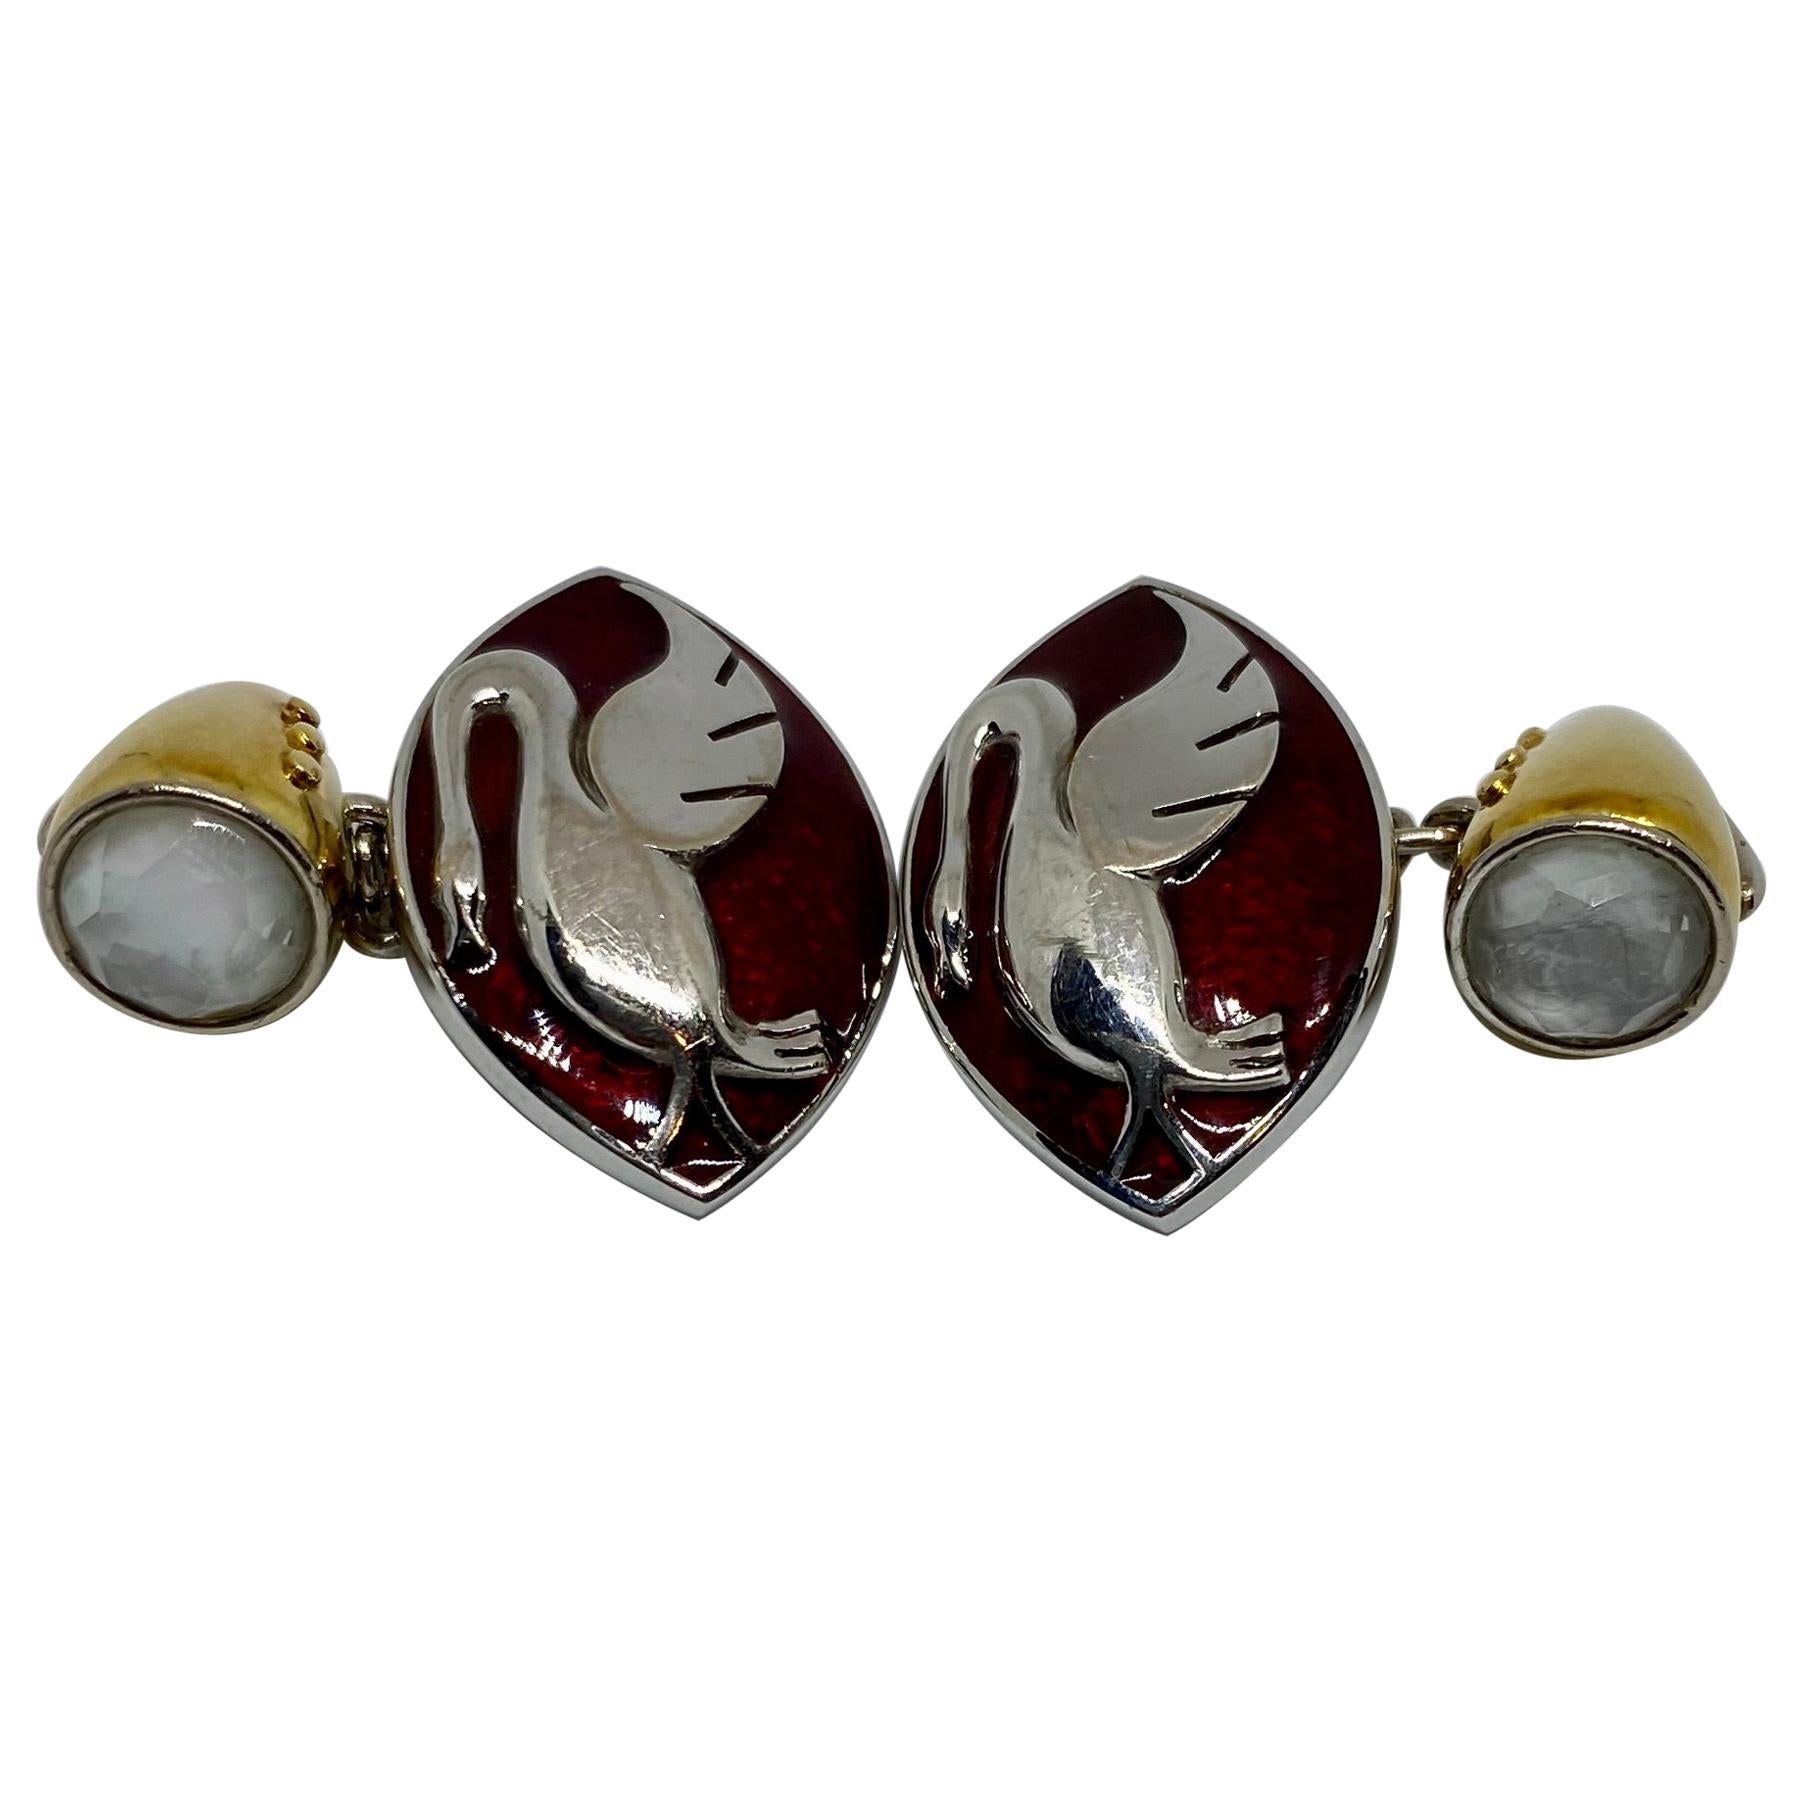 18 Karat Gold, Enamel and Moonstone Cufflinks Made for a Motor Car Enthusiast For Sale